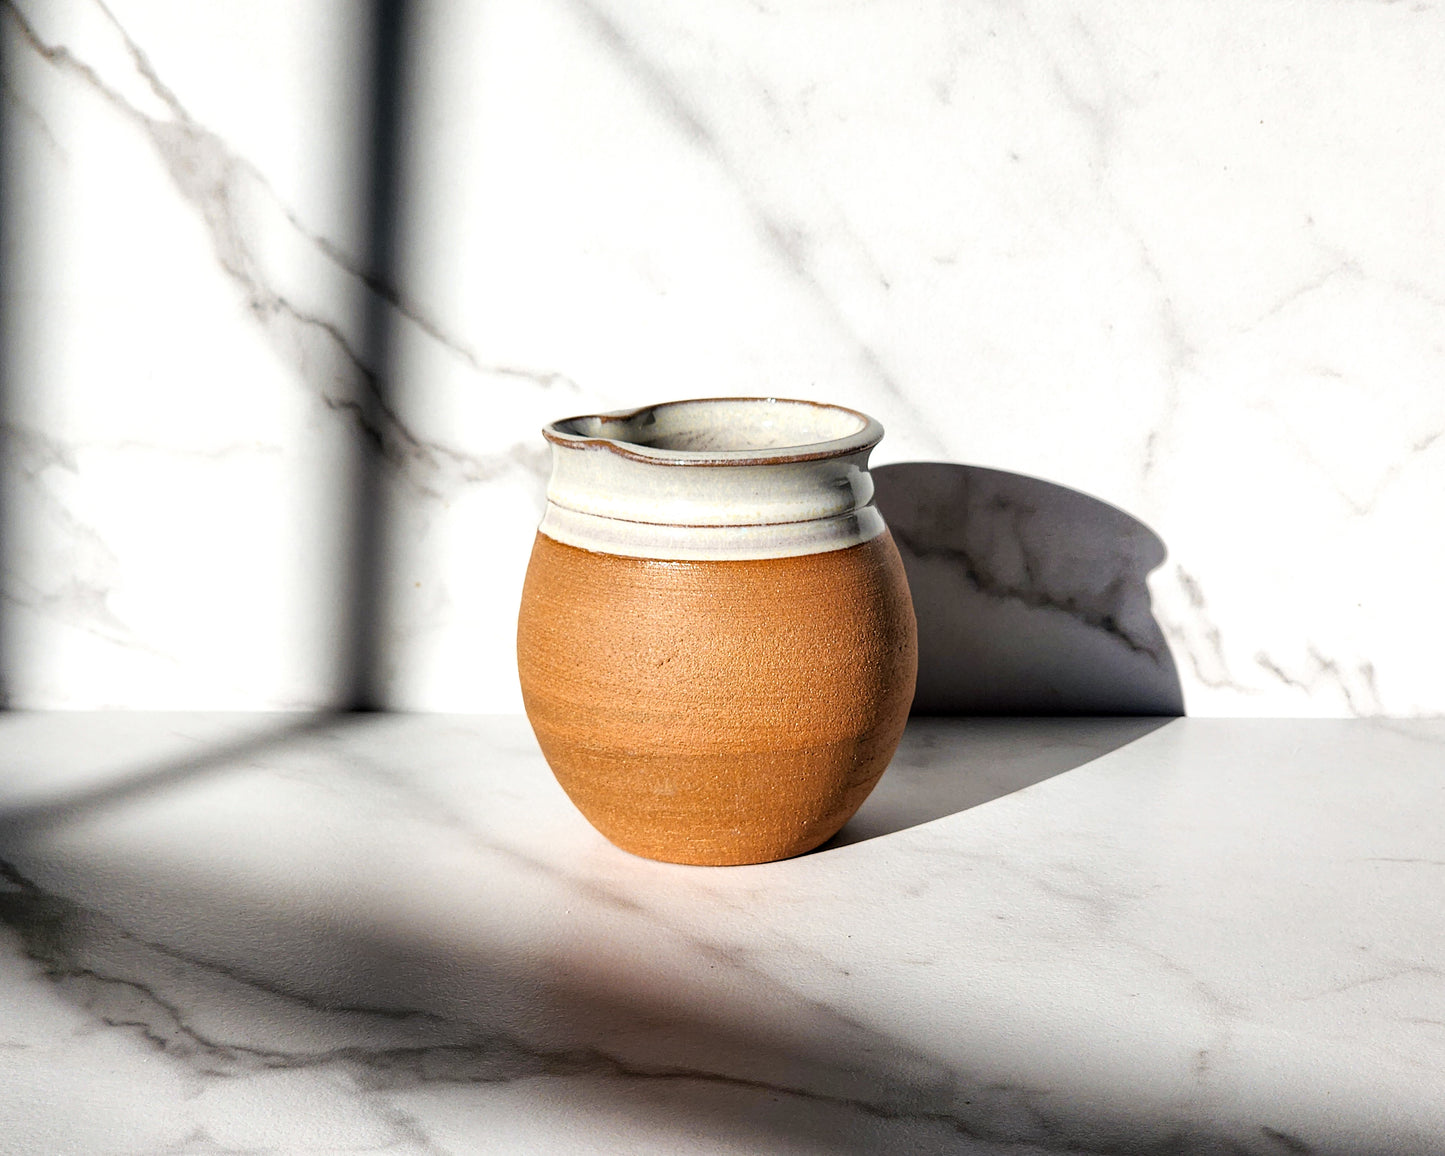 Image Description: A Natural creamer by Clinton Pottery sits elegantly on a table, showcasing its earthy and organic appearance. Crafted with a smooth surface and minimalist design, this creamer exudes a rustic charm that complements any tabletop. Ideal for serving cream or milk alongside coffee or tea.